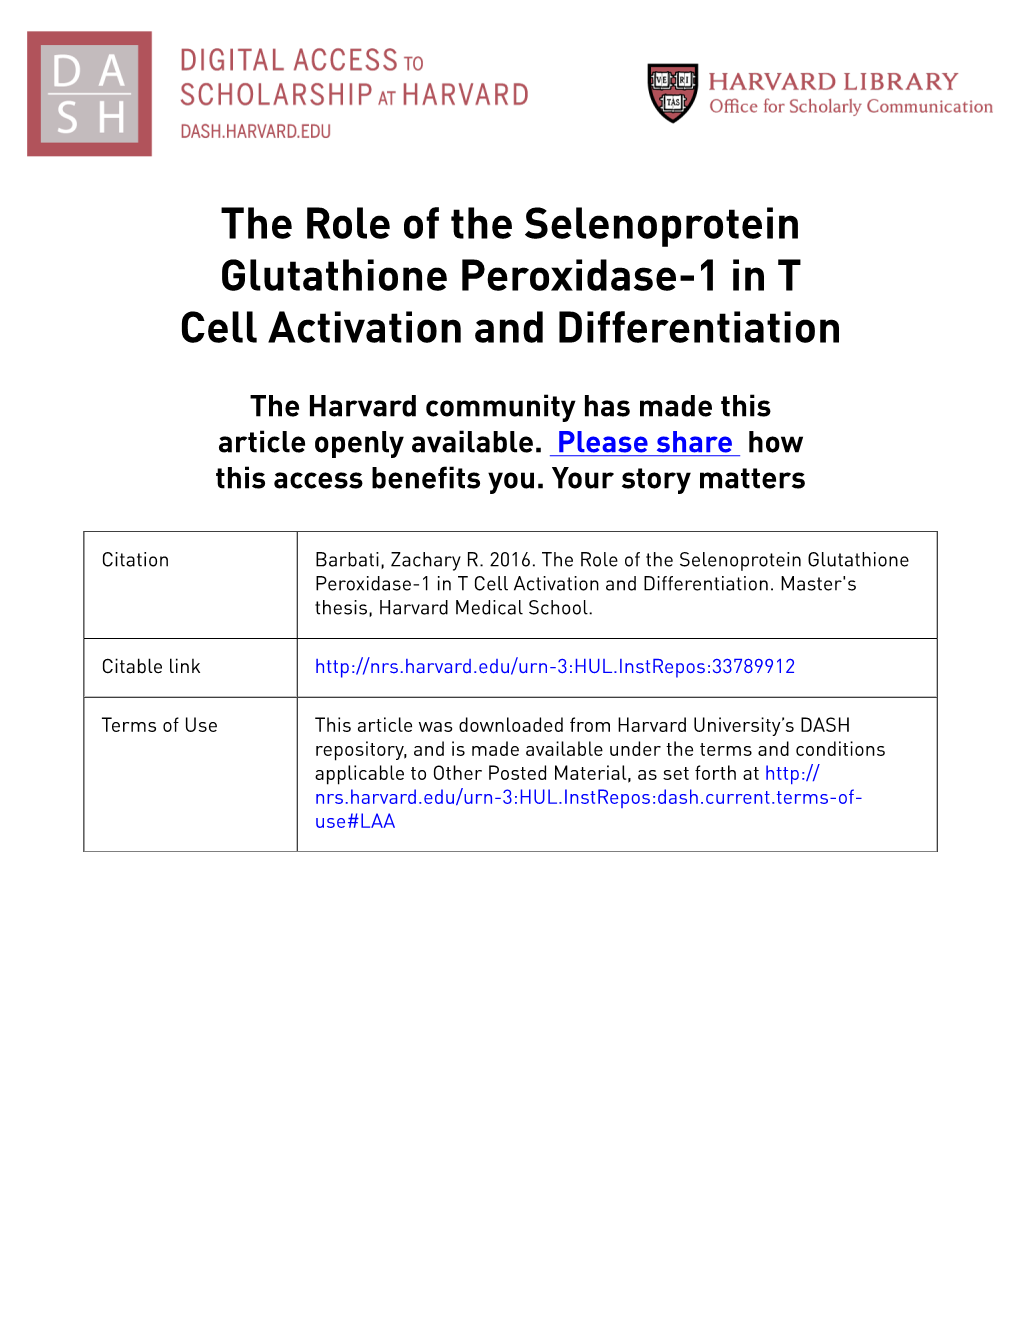 The Role of the Selenoprotein Glutathione Peroxidase-1 in T Cell Activation and Differentiation